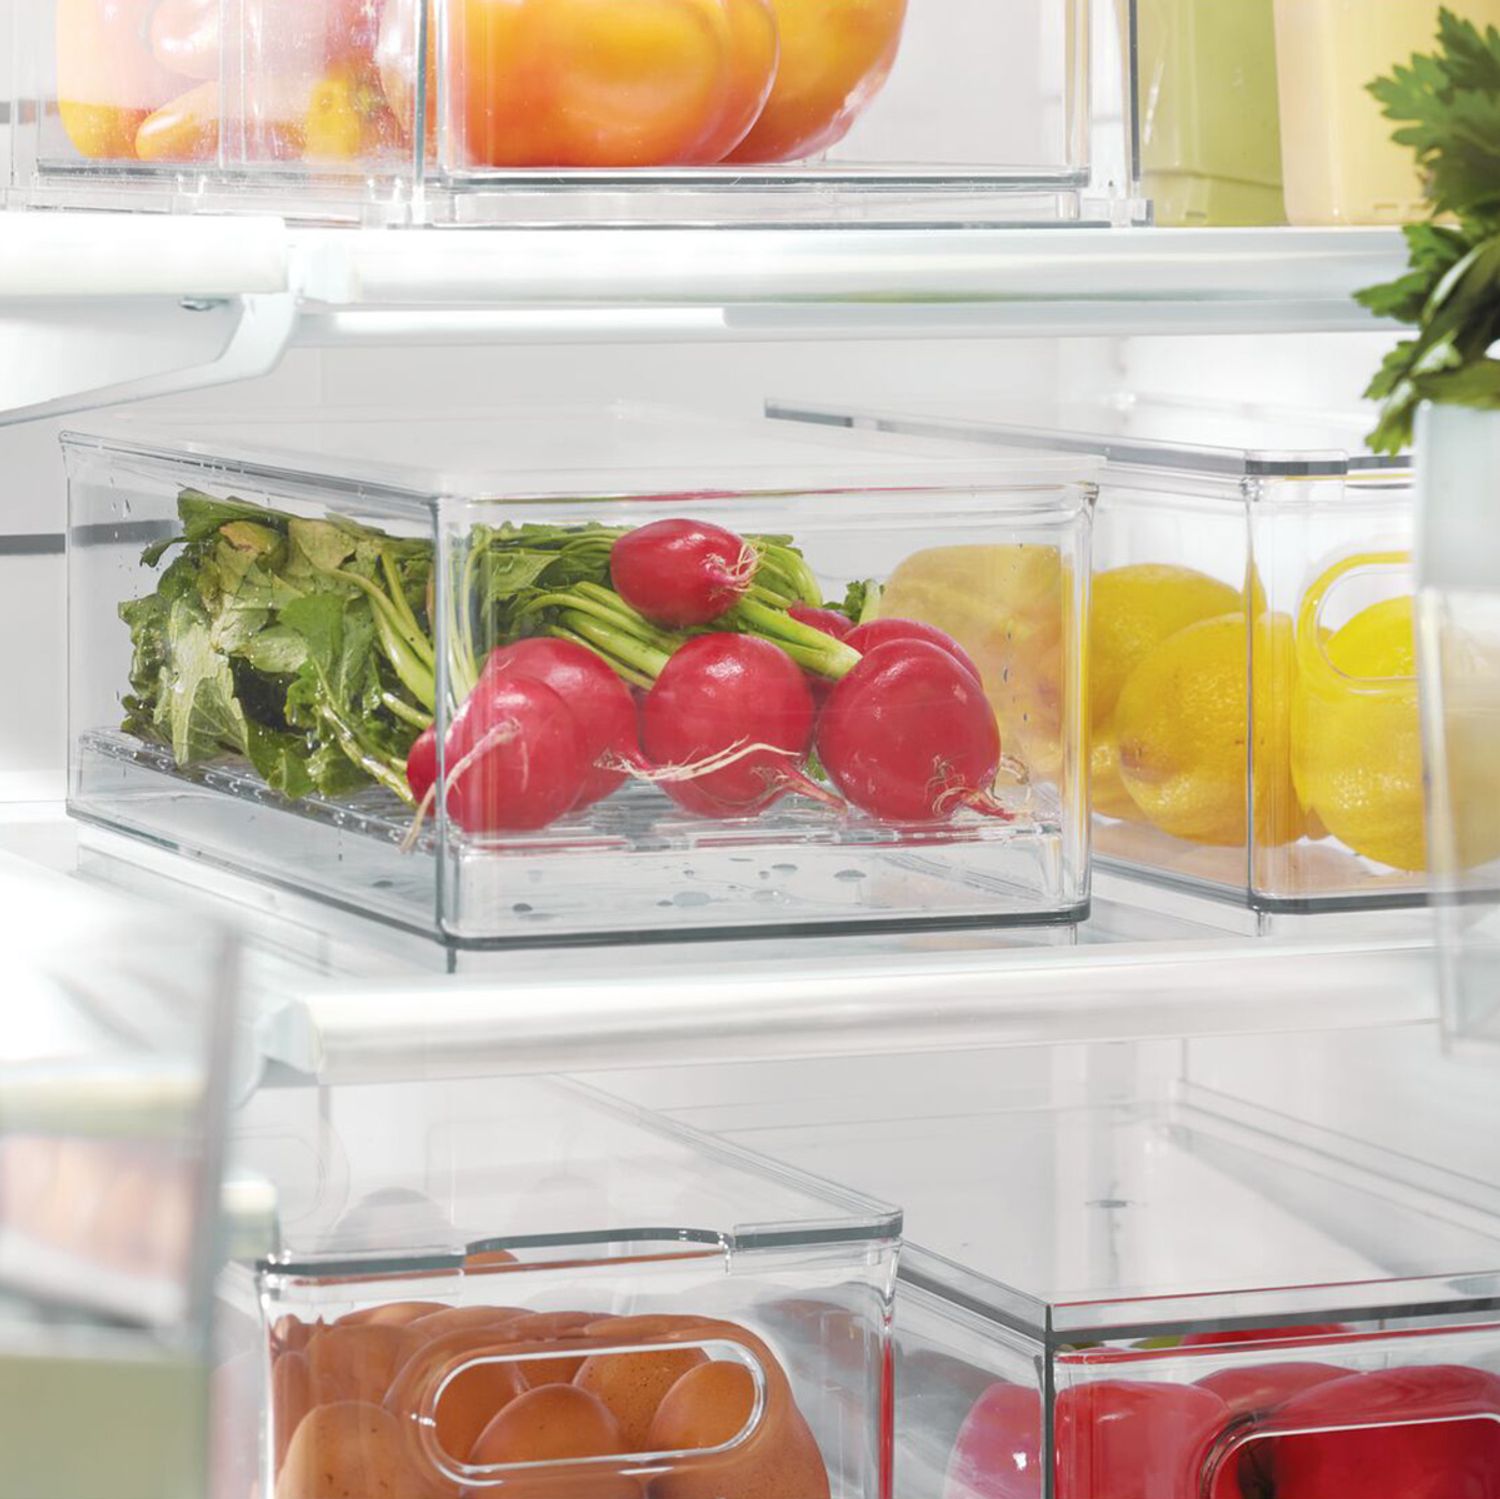 Shop The Home Edit by IDesign’s Produce Bins from The Container Store on Openhaus